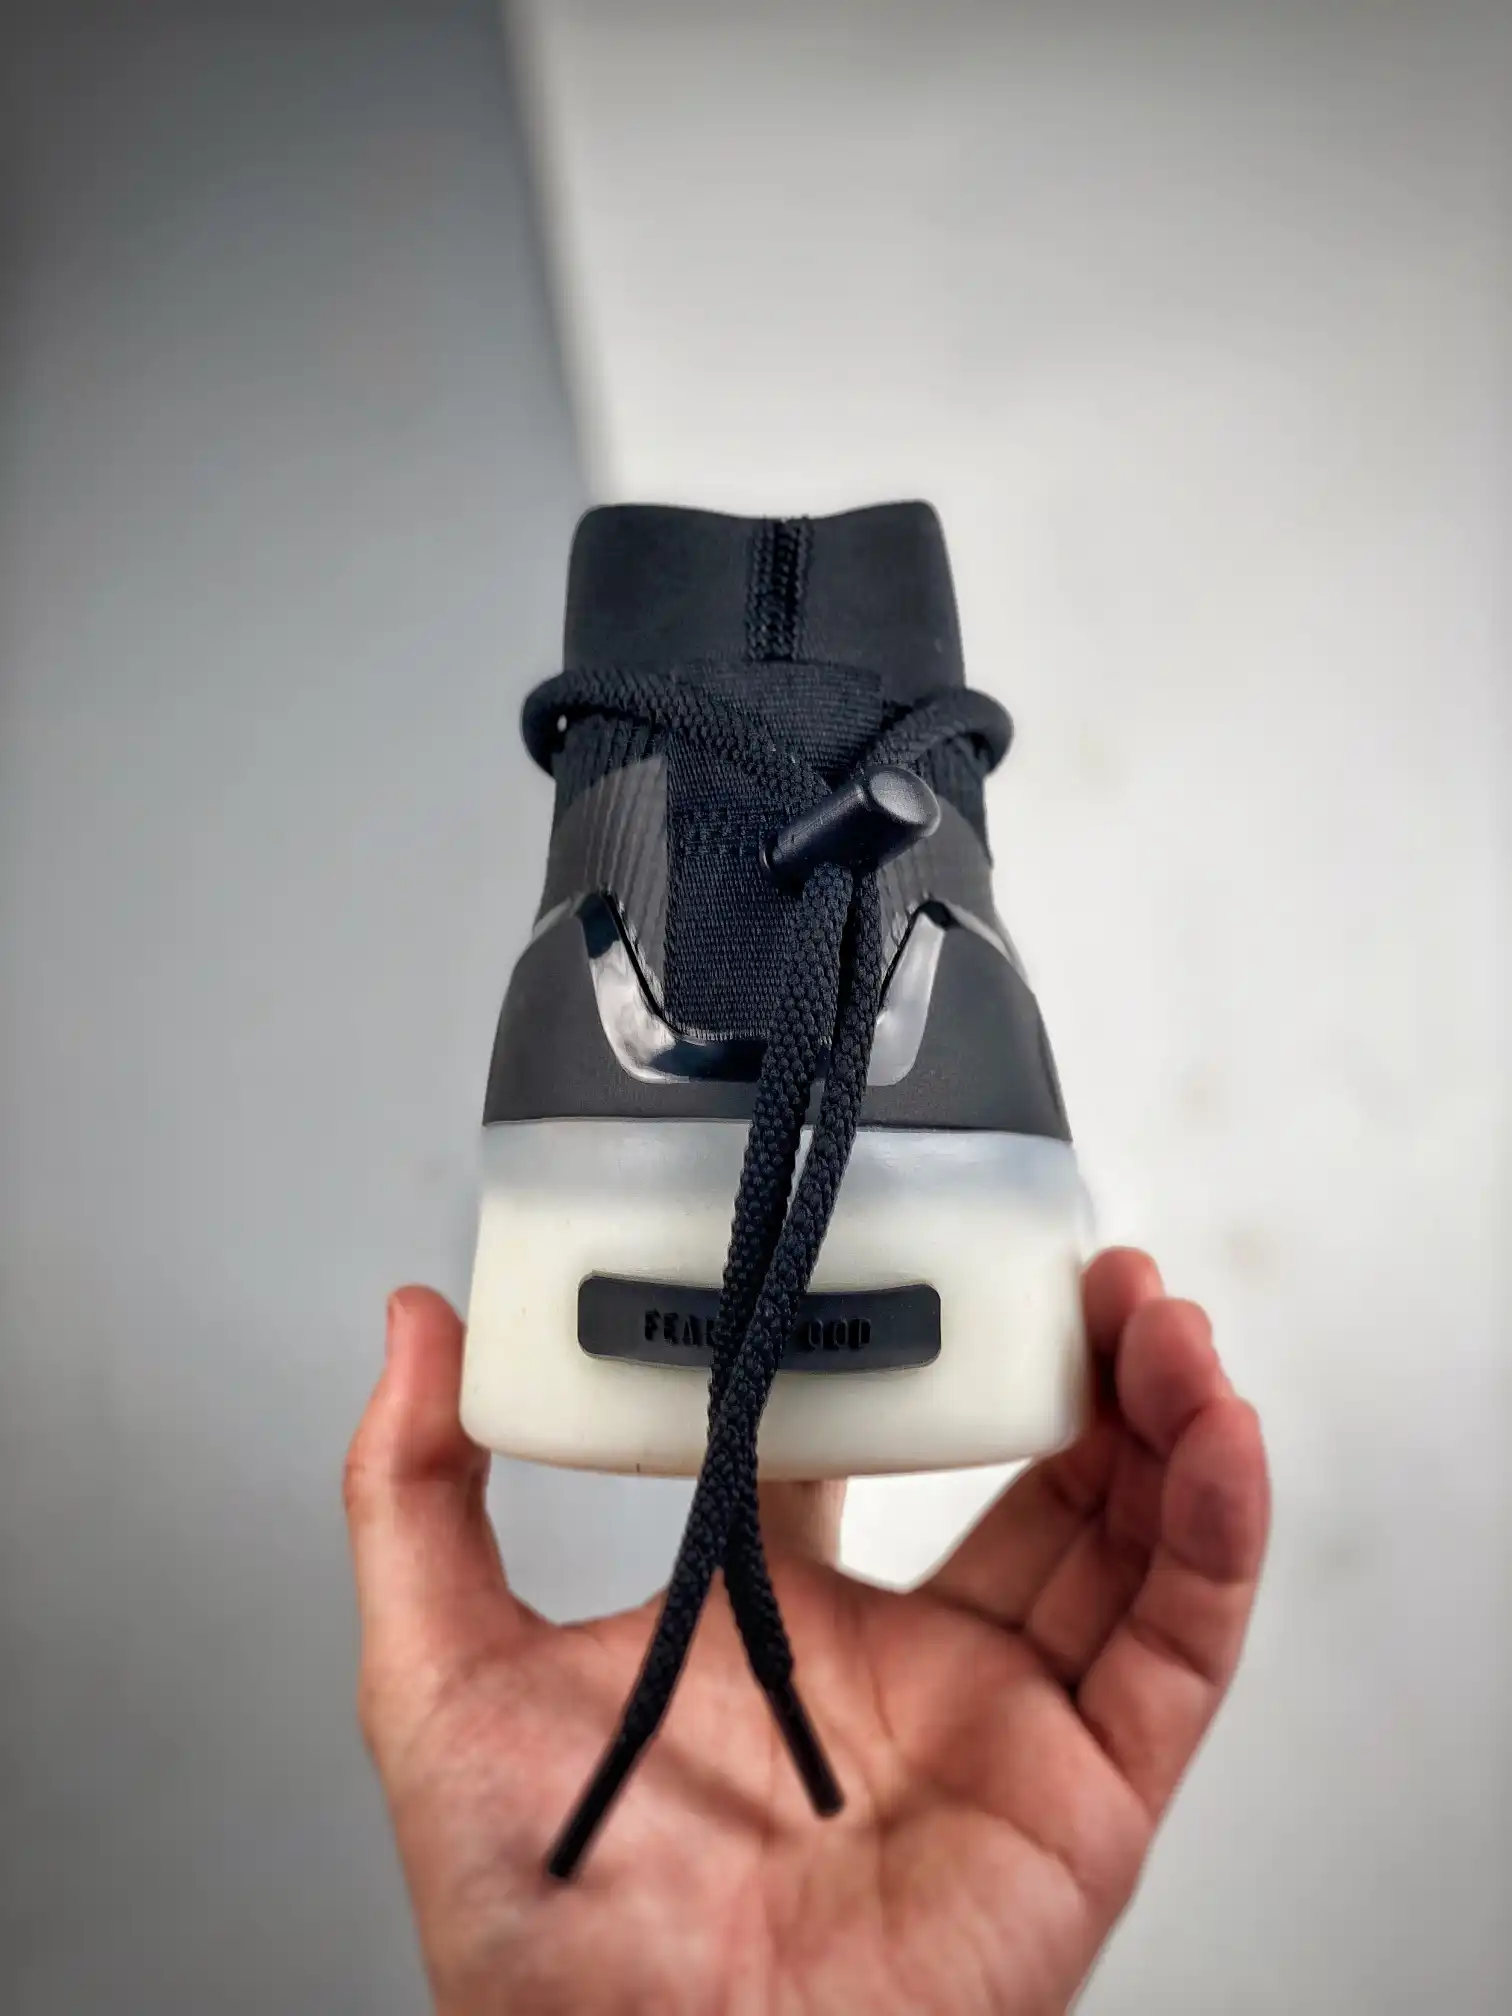 Fear of God Athletics I Basketball “Carbon” IF6680 For Sale – Sneaker Hello